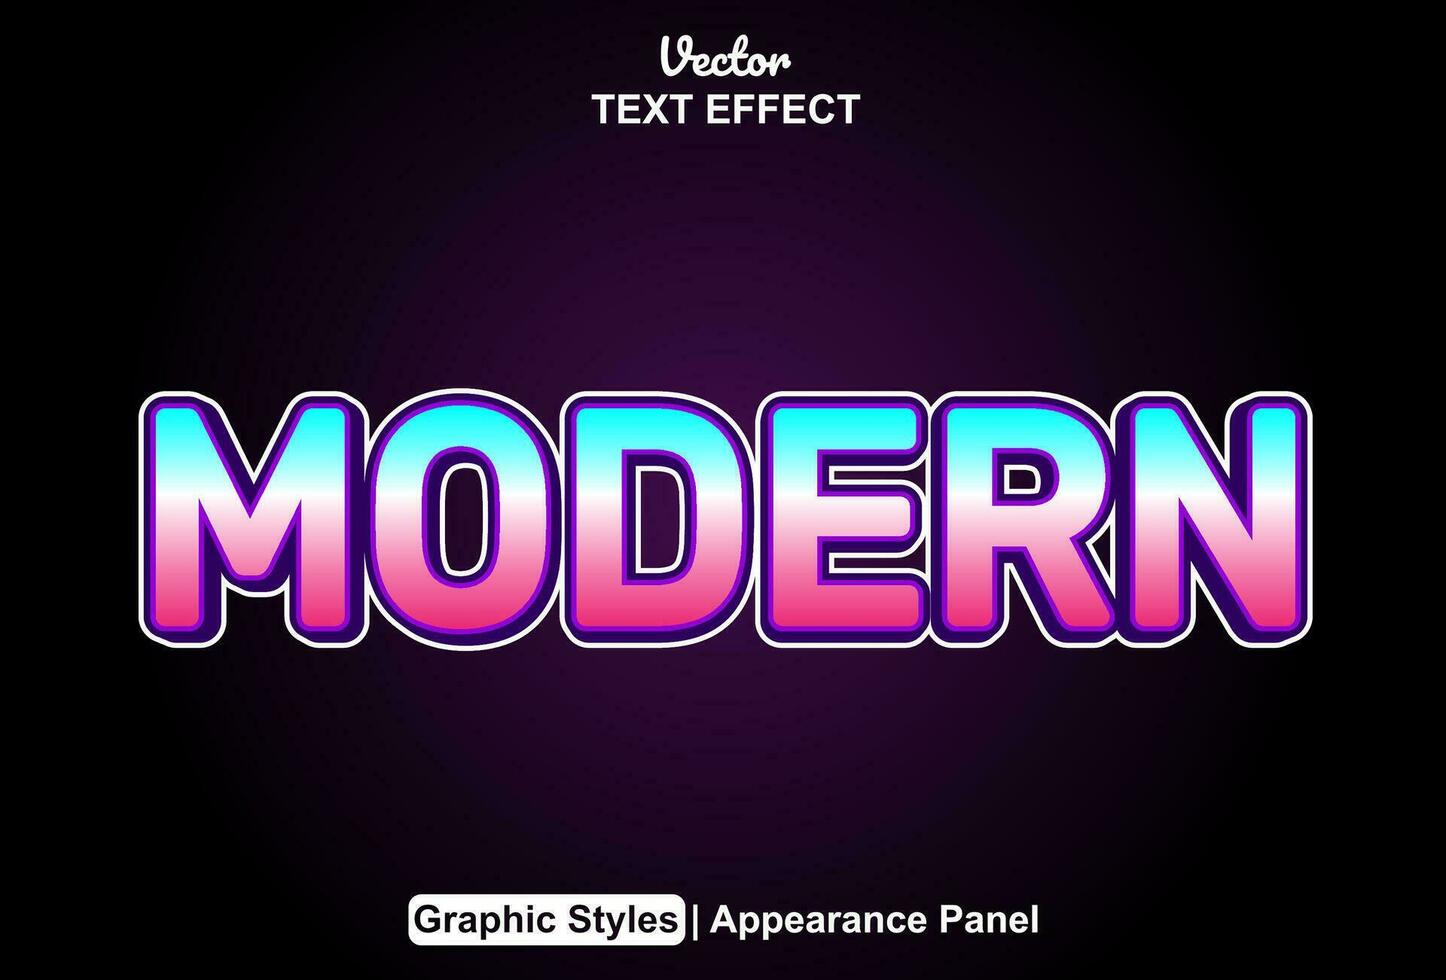 modern text effect with purple color graphic style and editable. vector